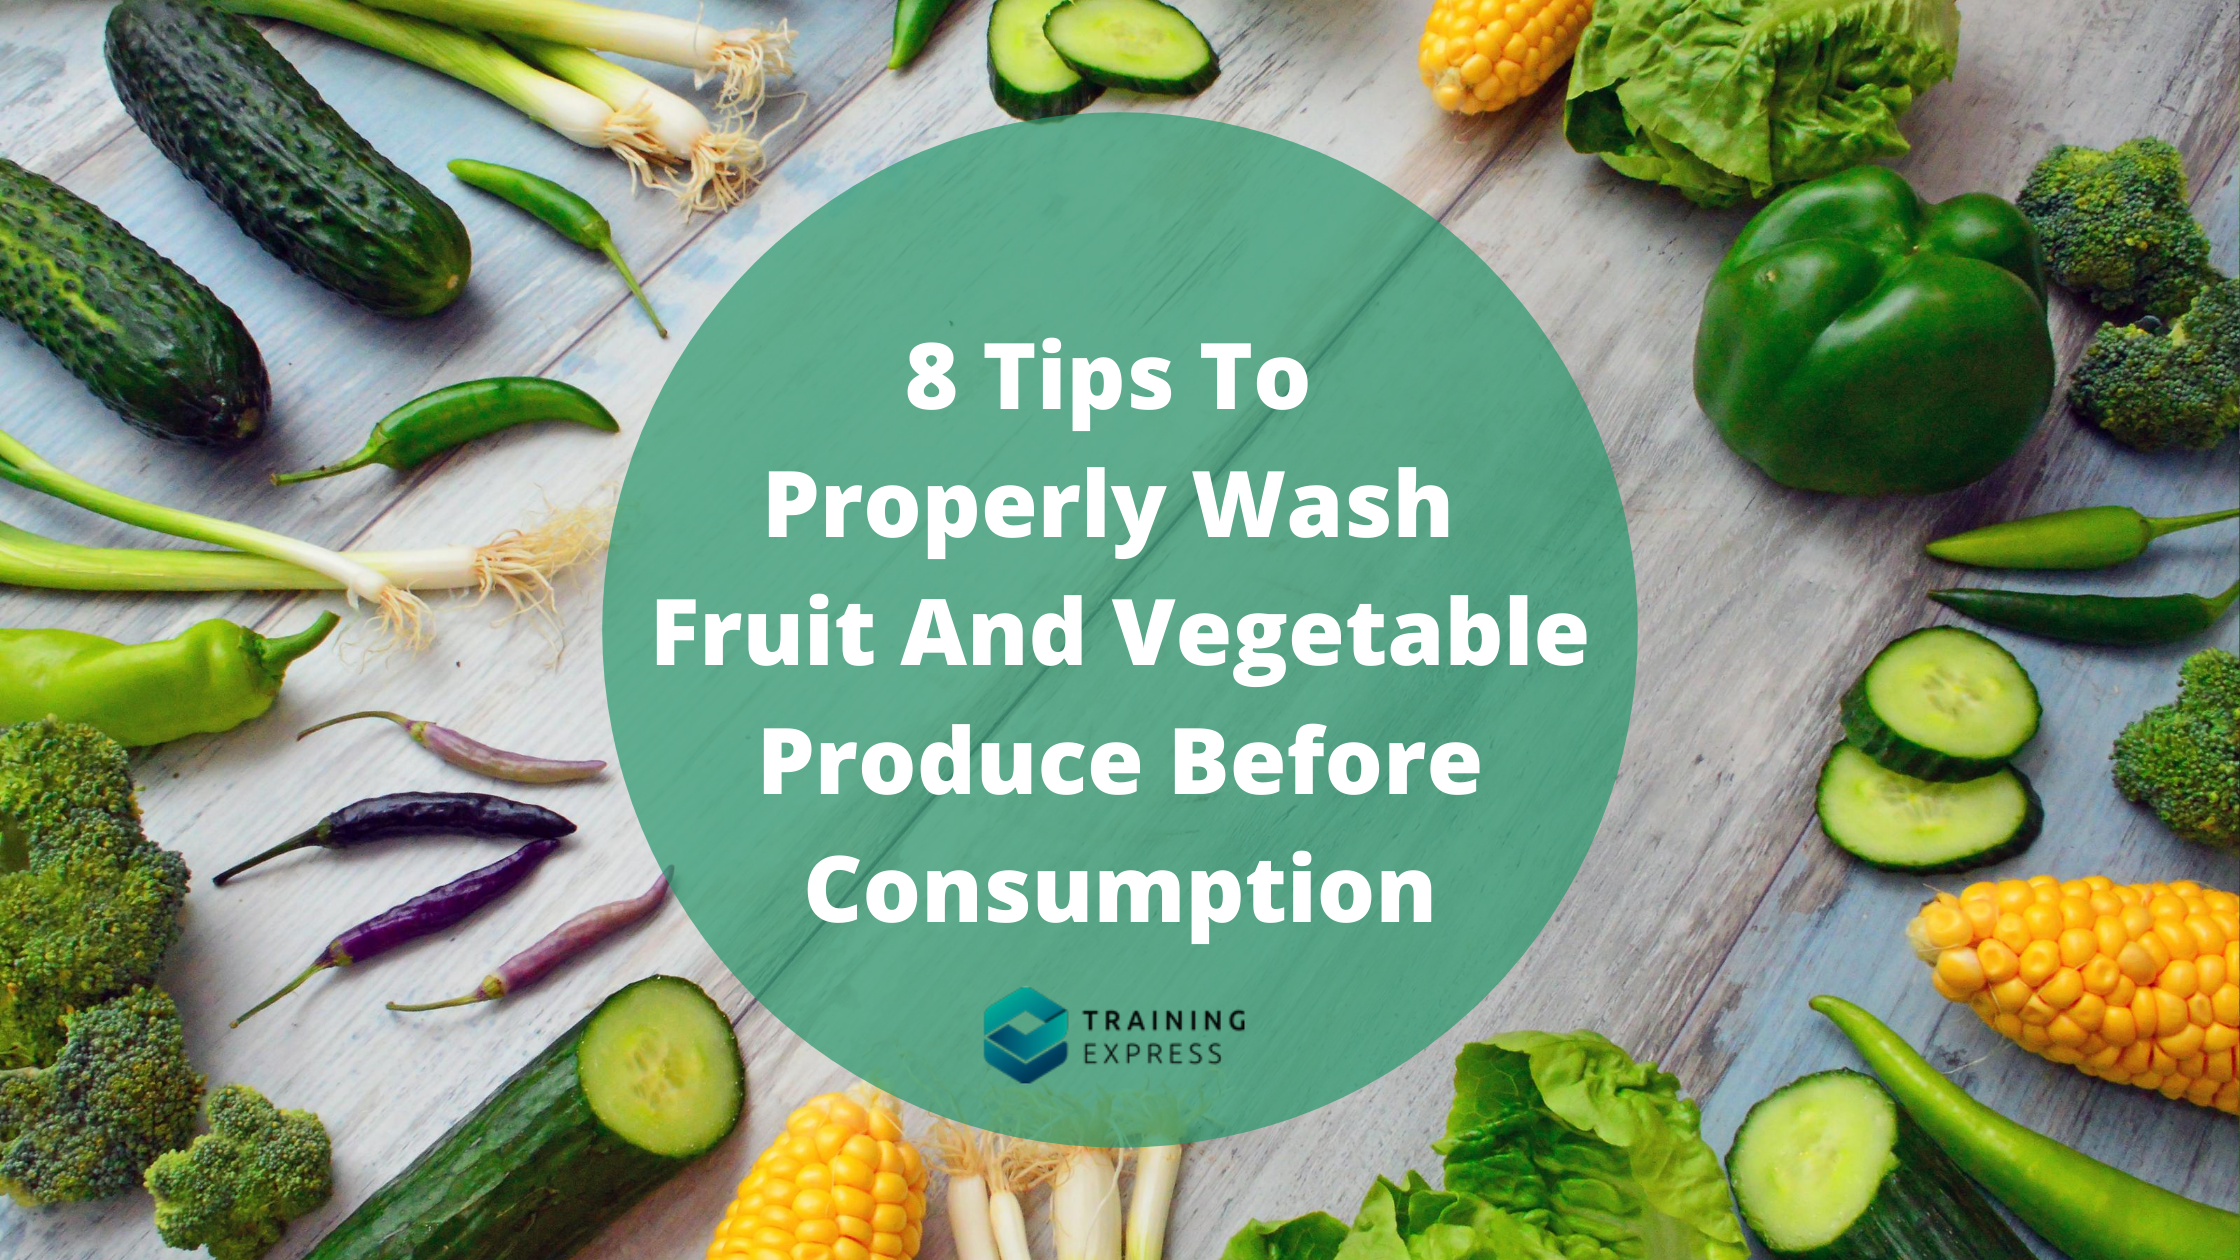 Food Safety Guide to Washing Fruits and Vegetables​